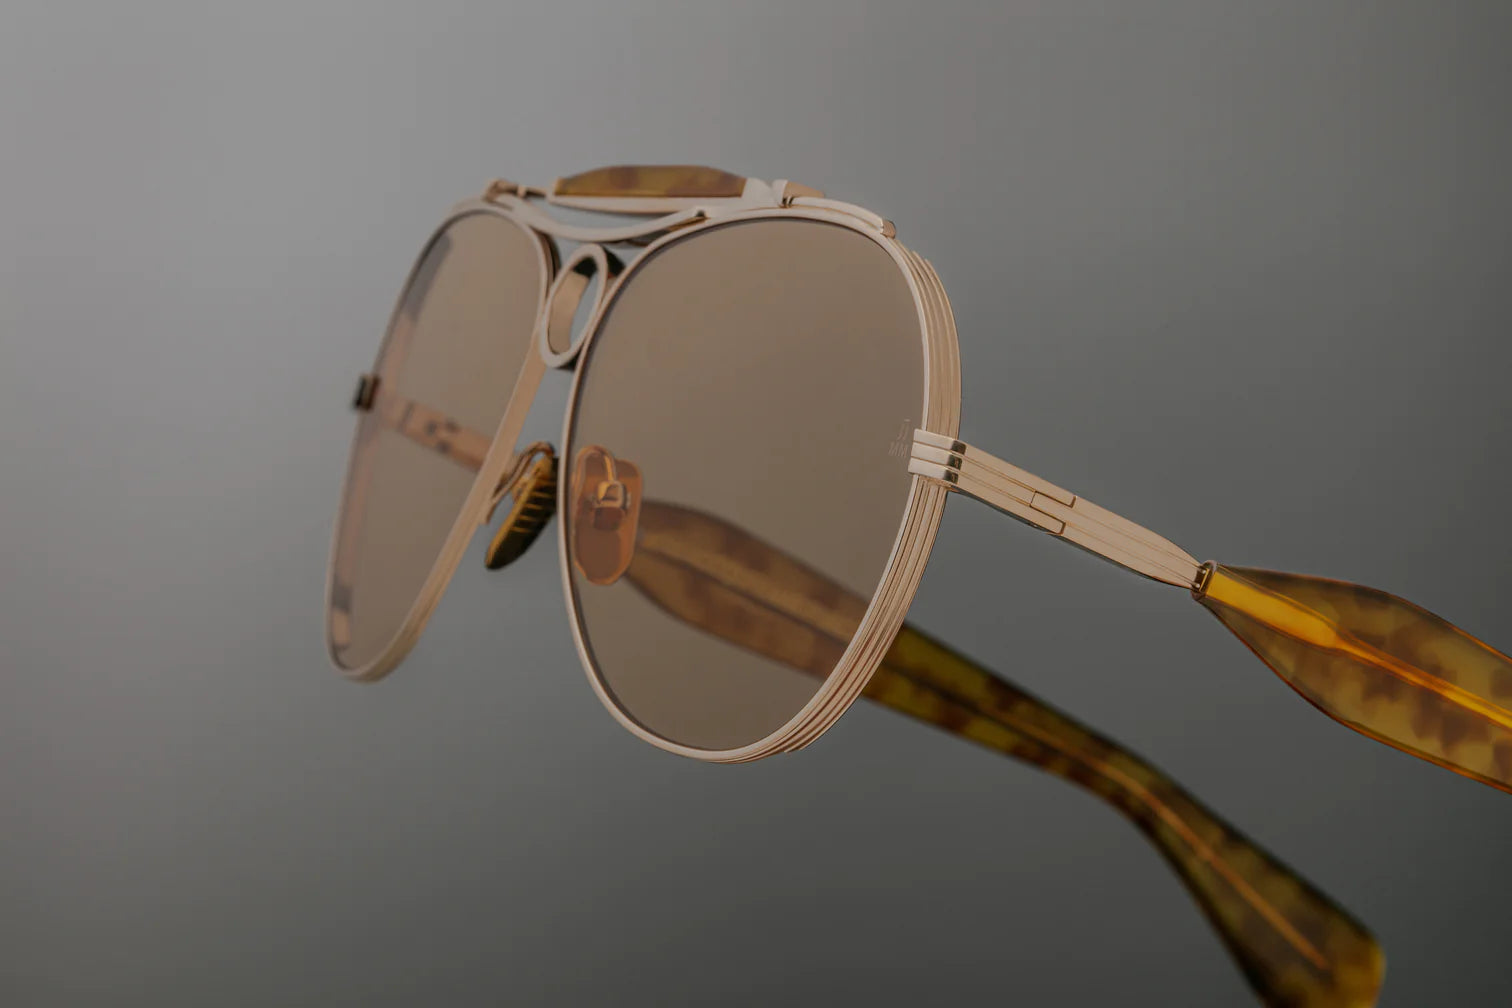 Jacques Marie Mage Aspen sunglass frames in a shooter style; gold with bottle green lenses.